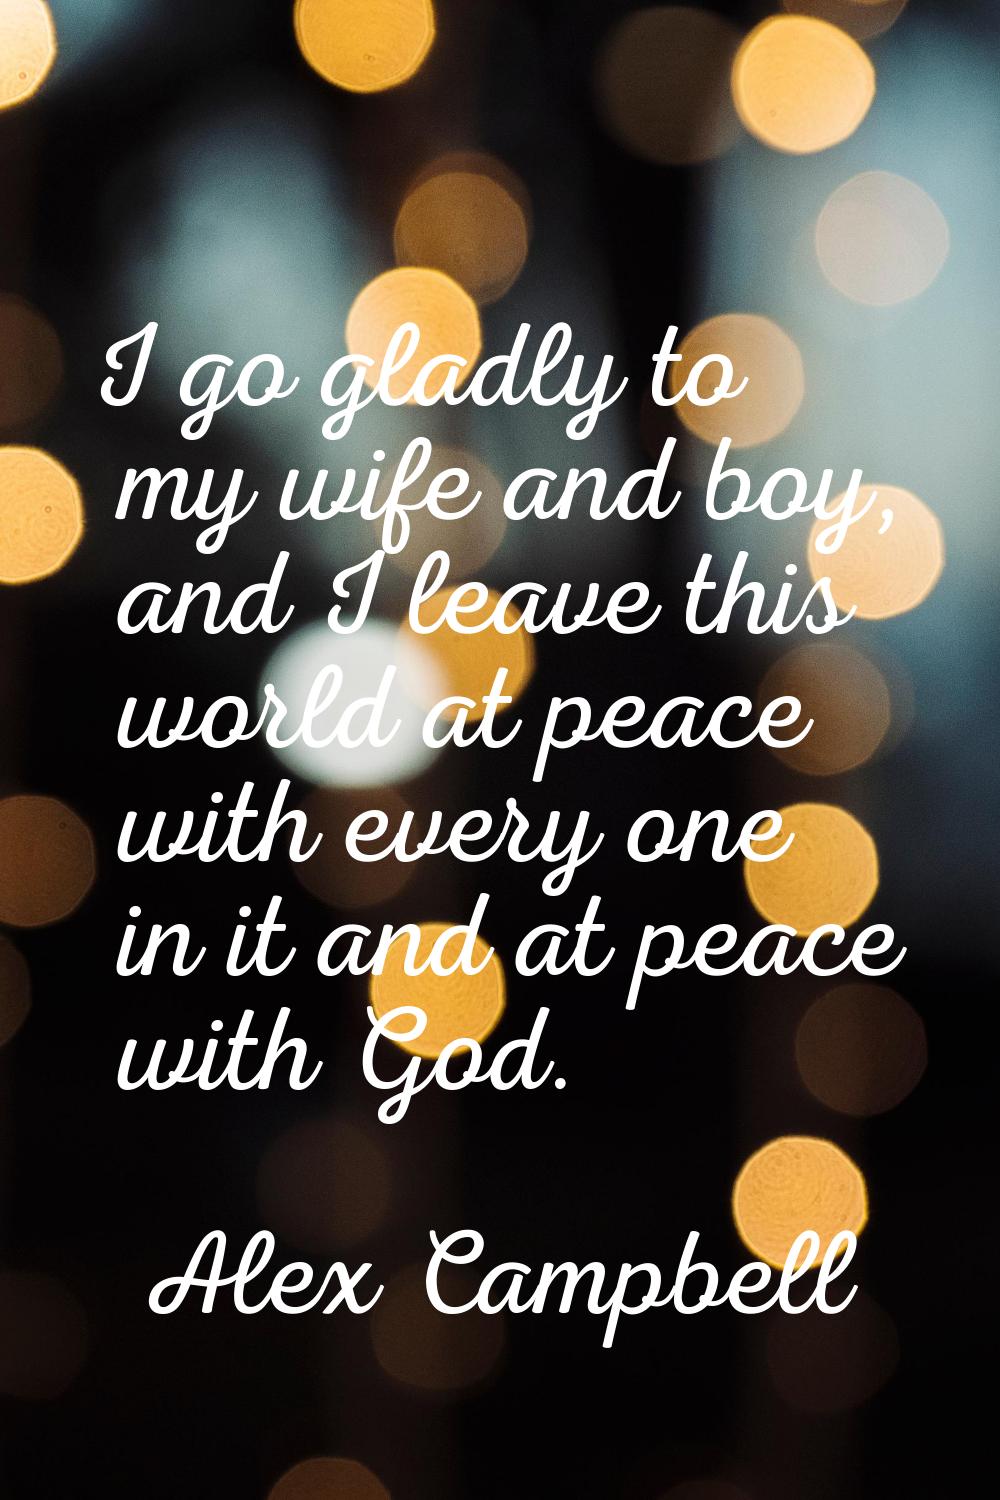 I go gladly to my wife and boy, and I leave this world at peace with every one in it and at peace w